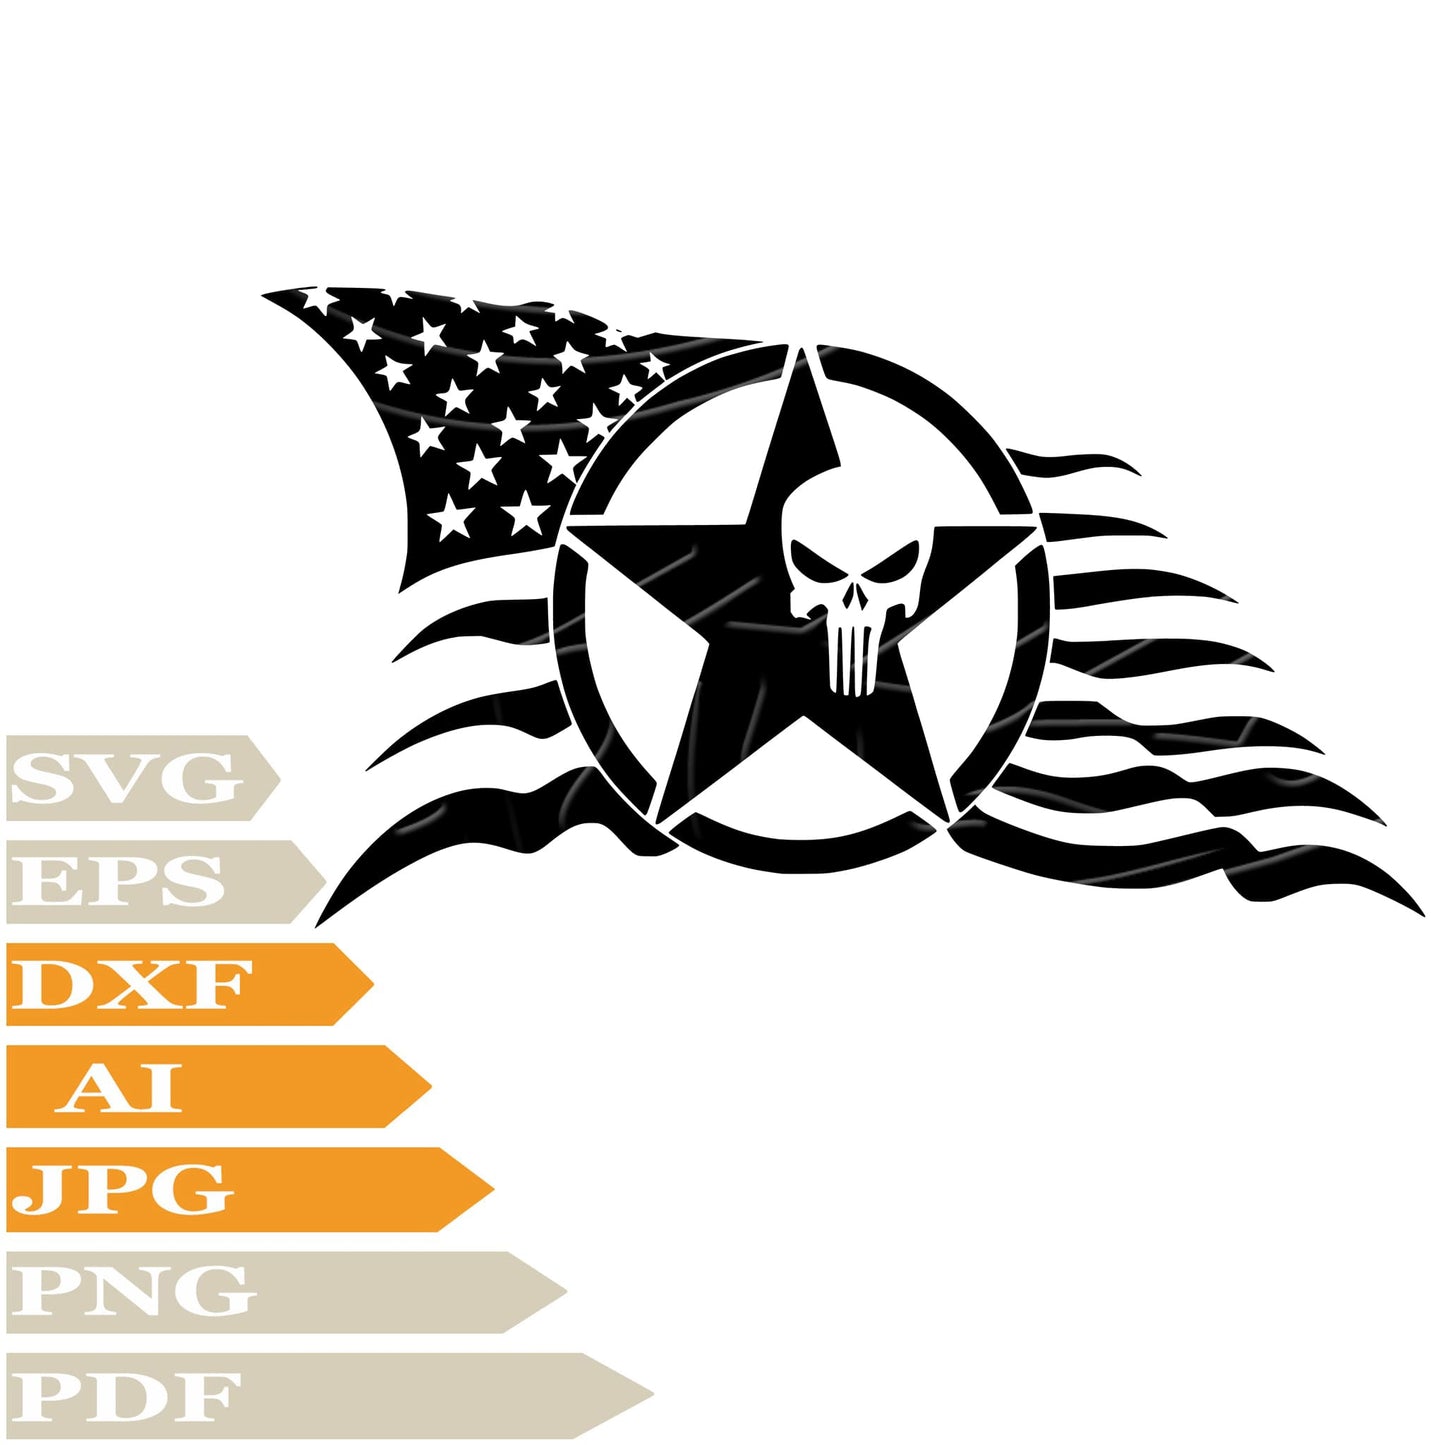 USA Flag SVG File, Military Jeep Logo SVG Design, Skull USA Flag PNG, USA Flag Jeep Logo Vector Graphics, Cut File, For Cricut, Clipart, T–Shirt, For Tattoo, Silhouette